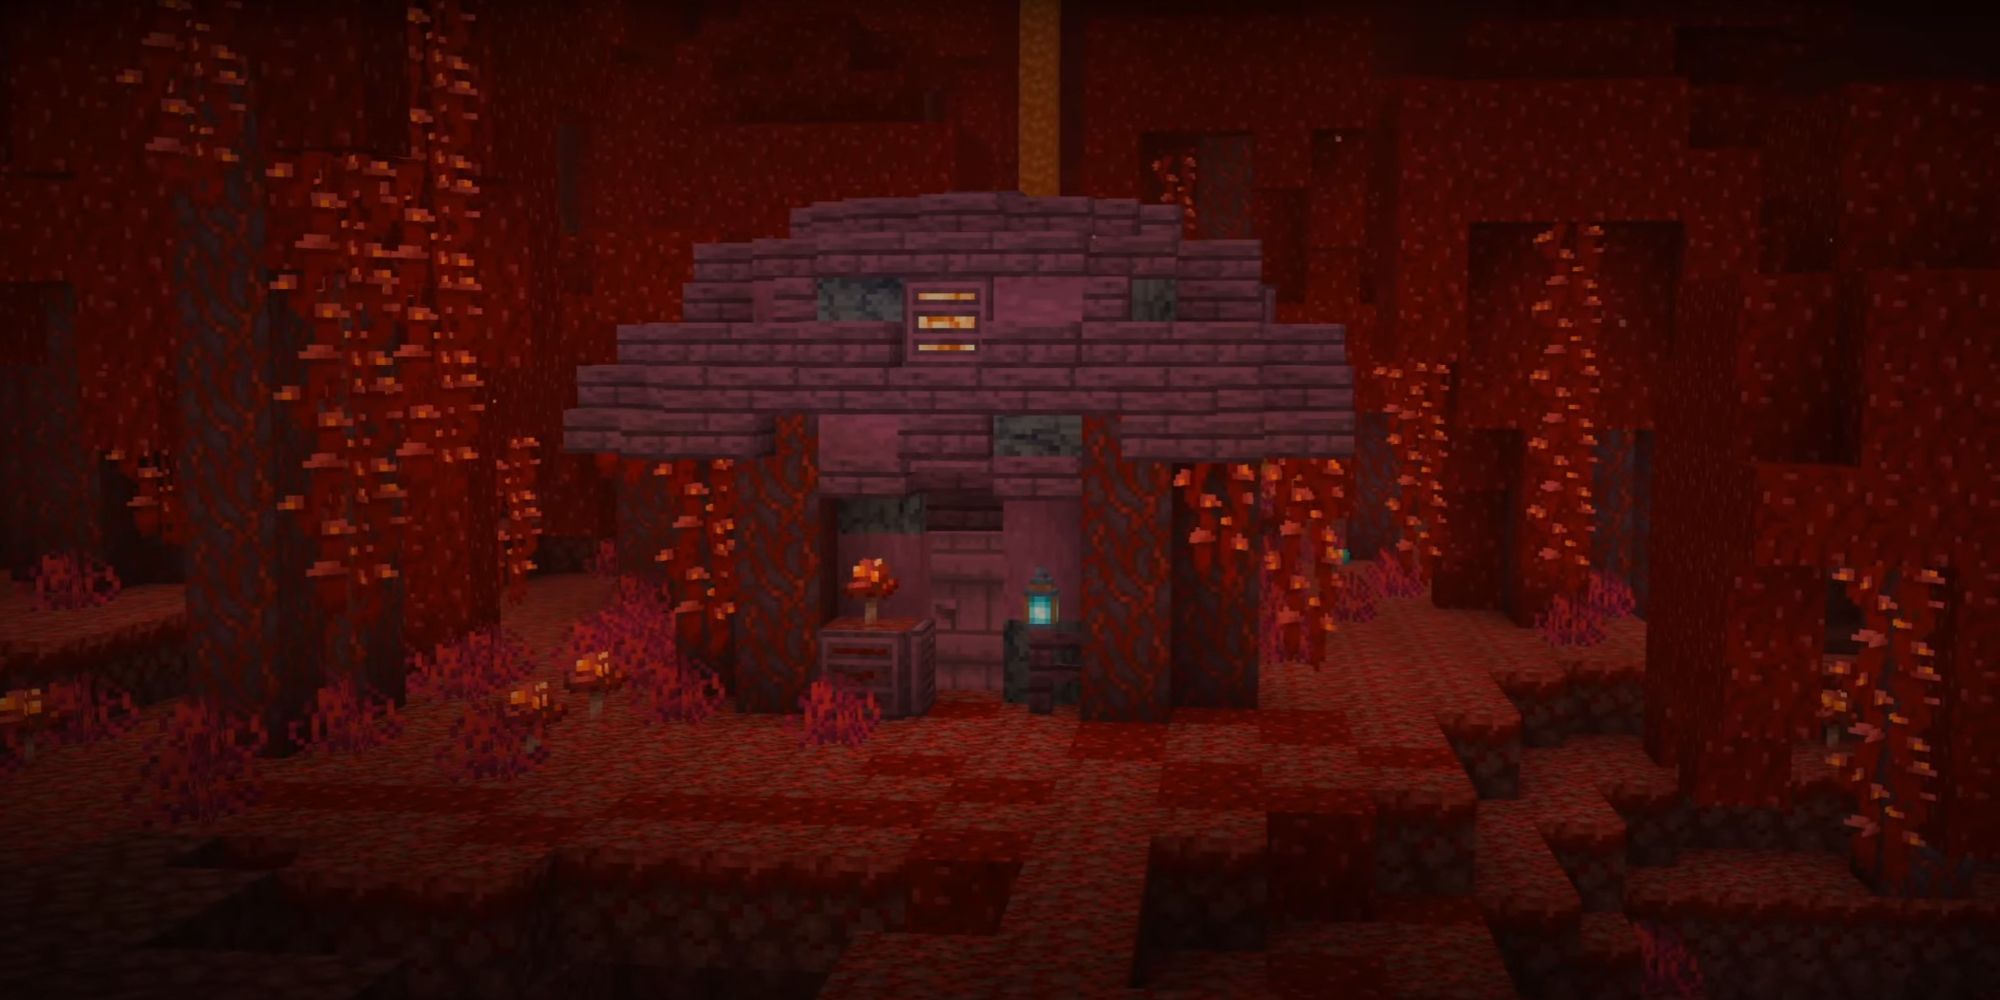 An image from Minecraft of a Wooden Nether House built out of crimson planks.